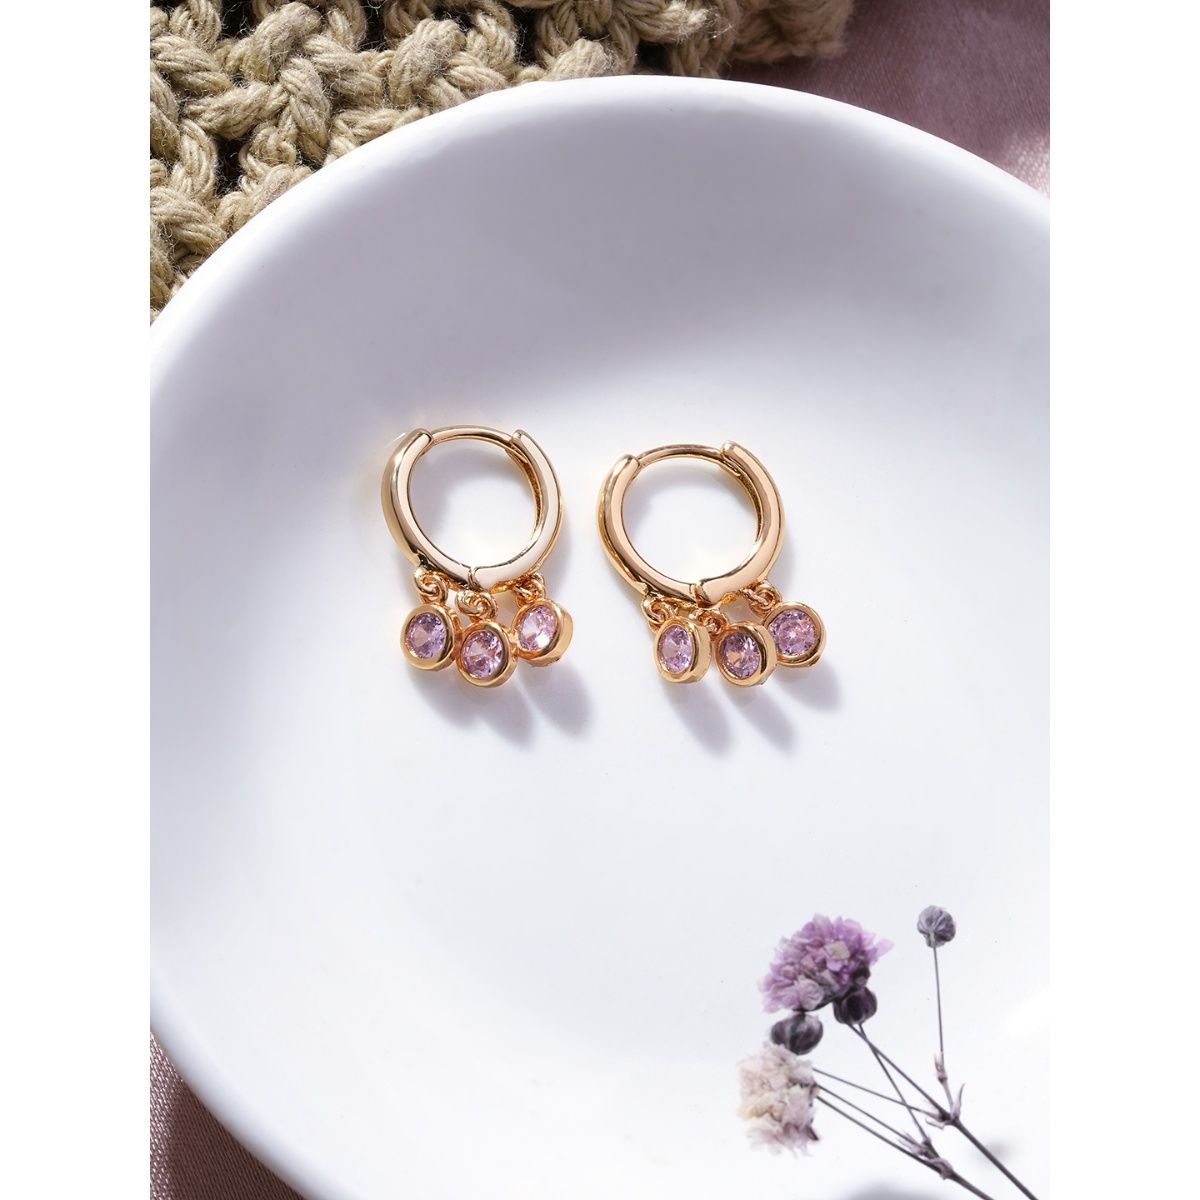 Carlton London Fashion Jewellery Gold Earrings Buy Carlton London Fashion Jewellery  Gold Earrings Online at Best Price in India  Nykaa